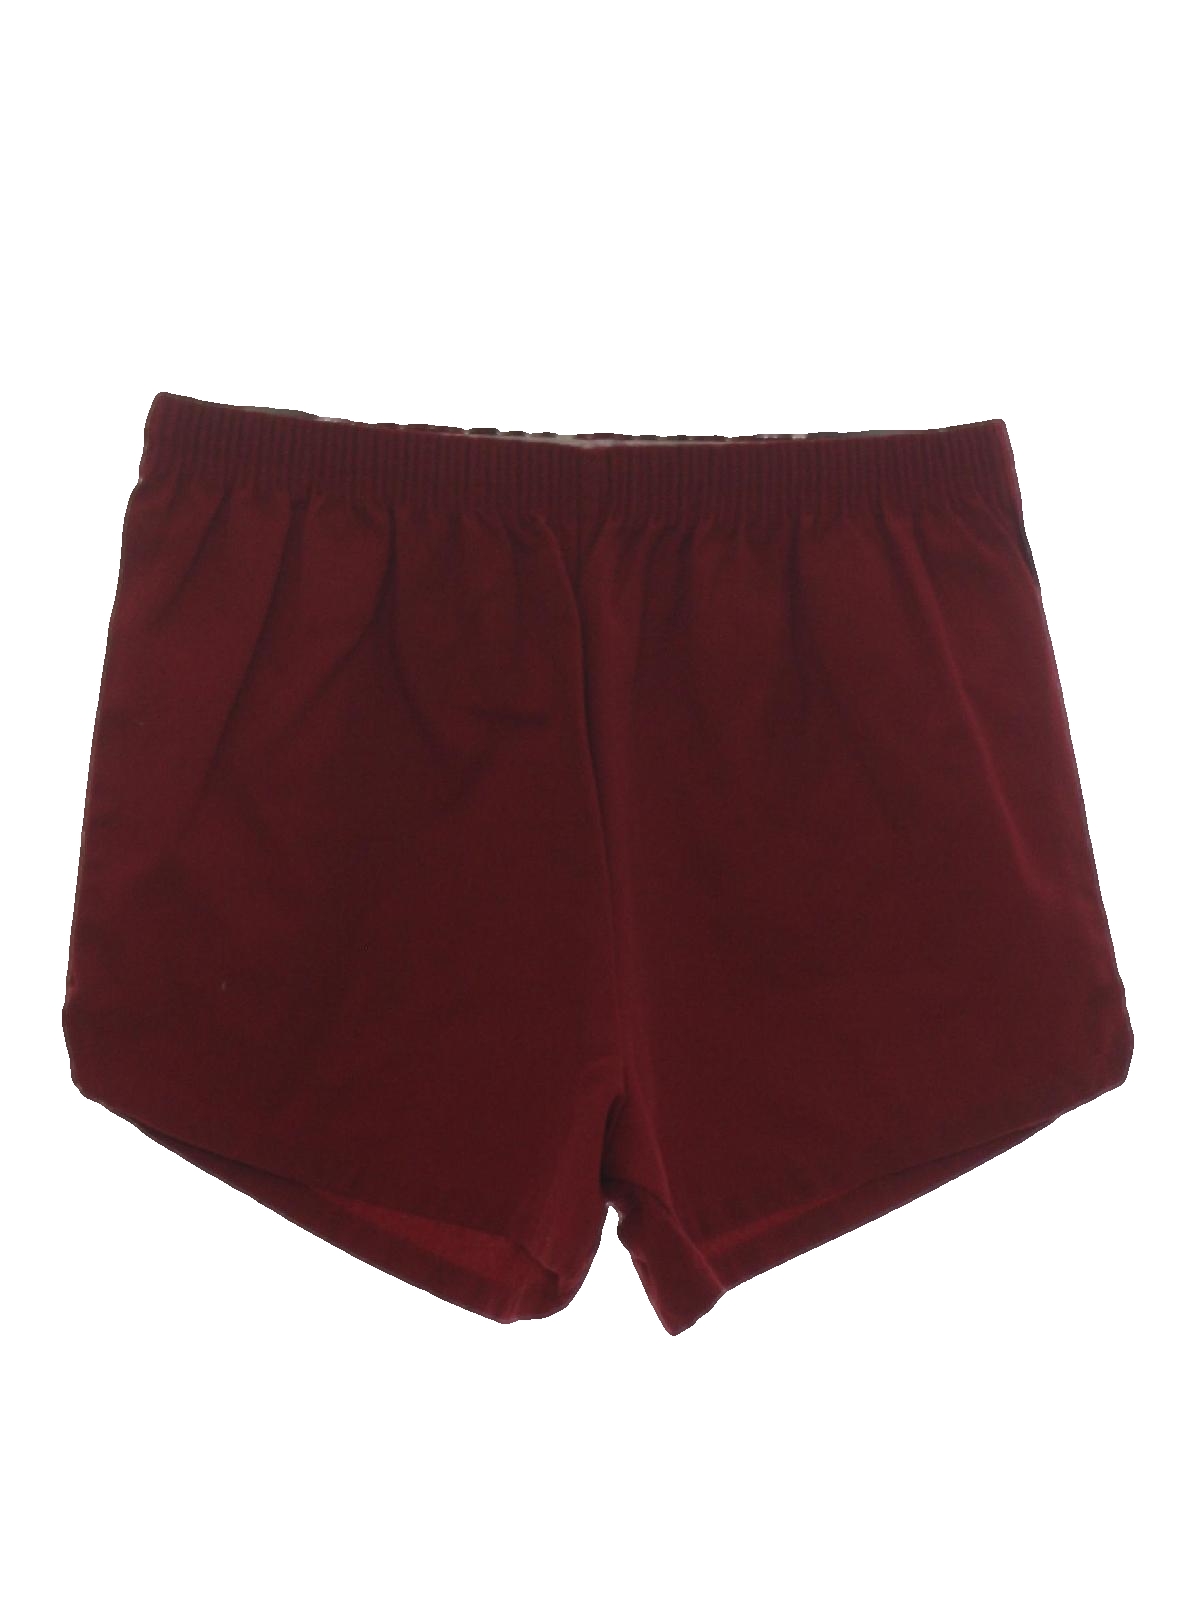 Eighties Vintage Shorts: 80s -Augusta- Mens red background polyester ...